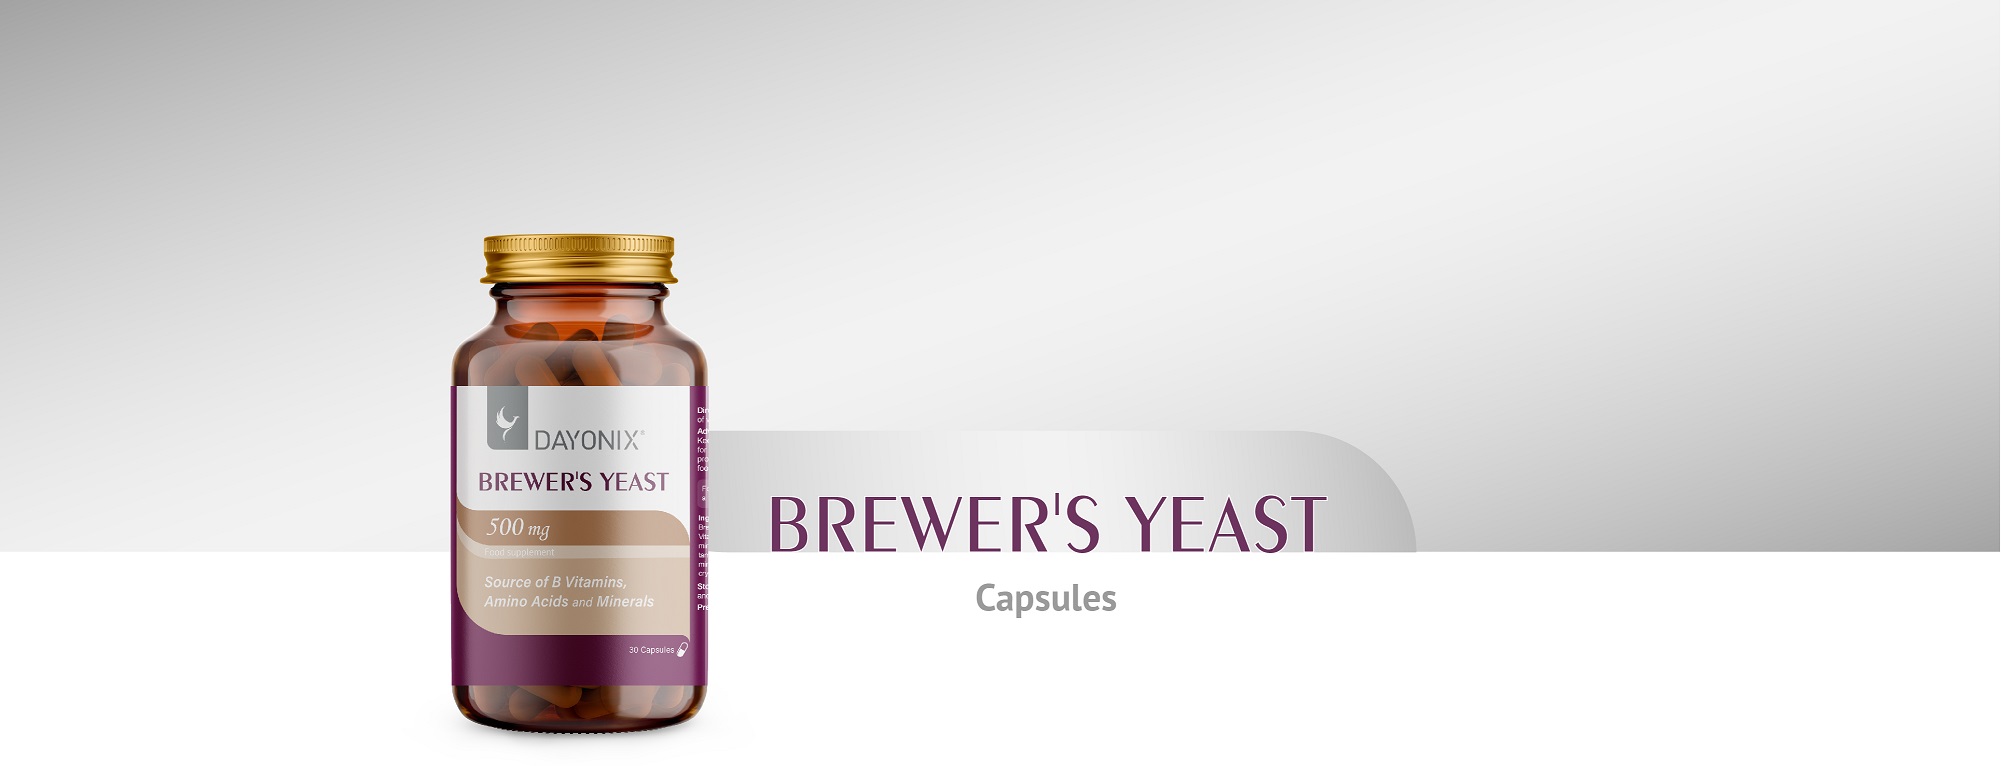 Brewers_yeast